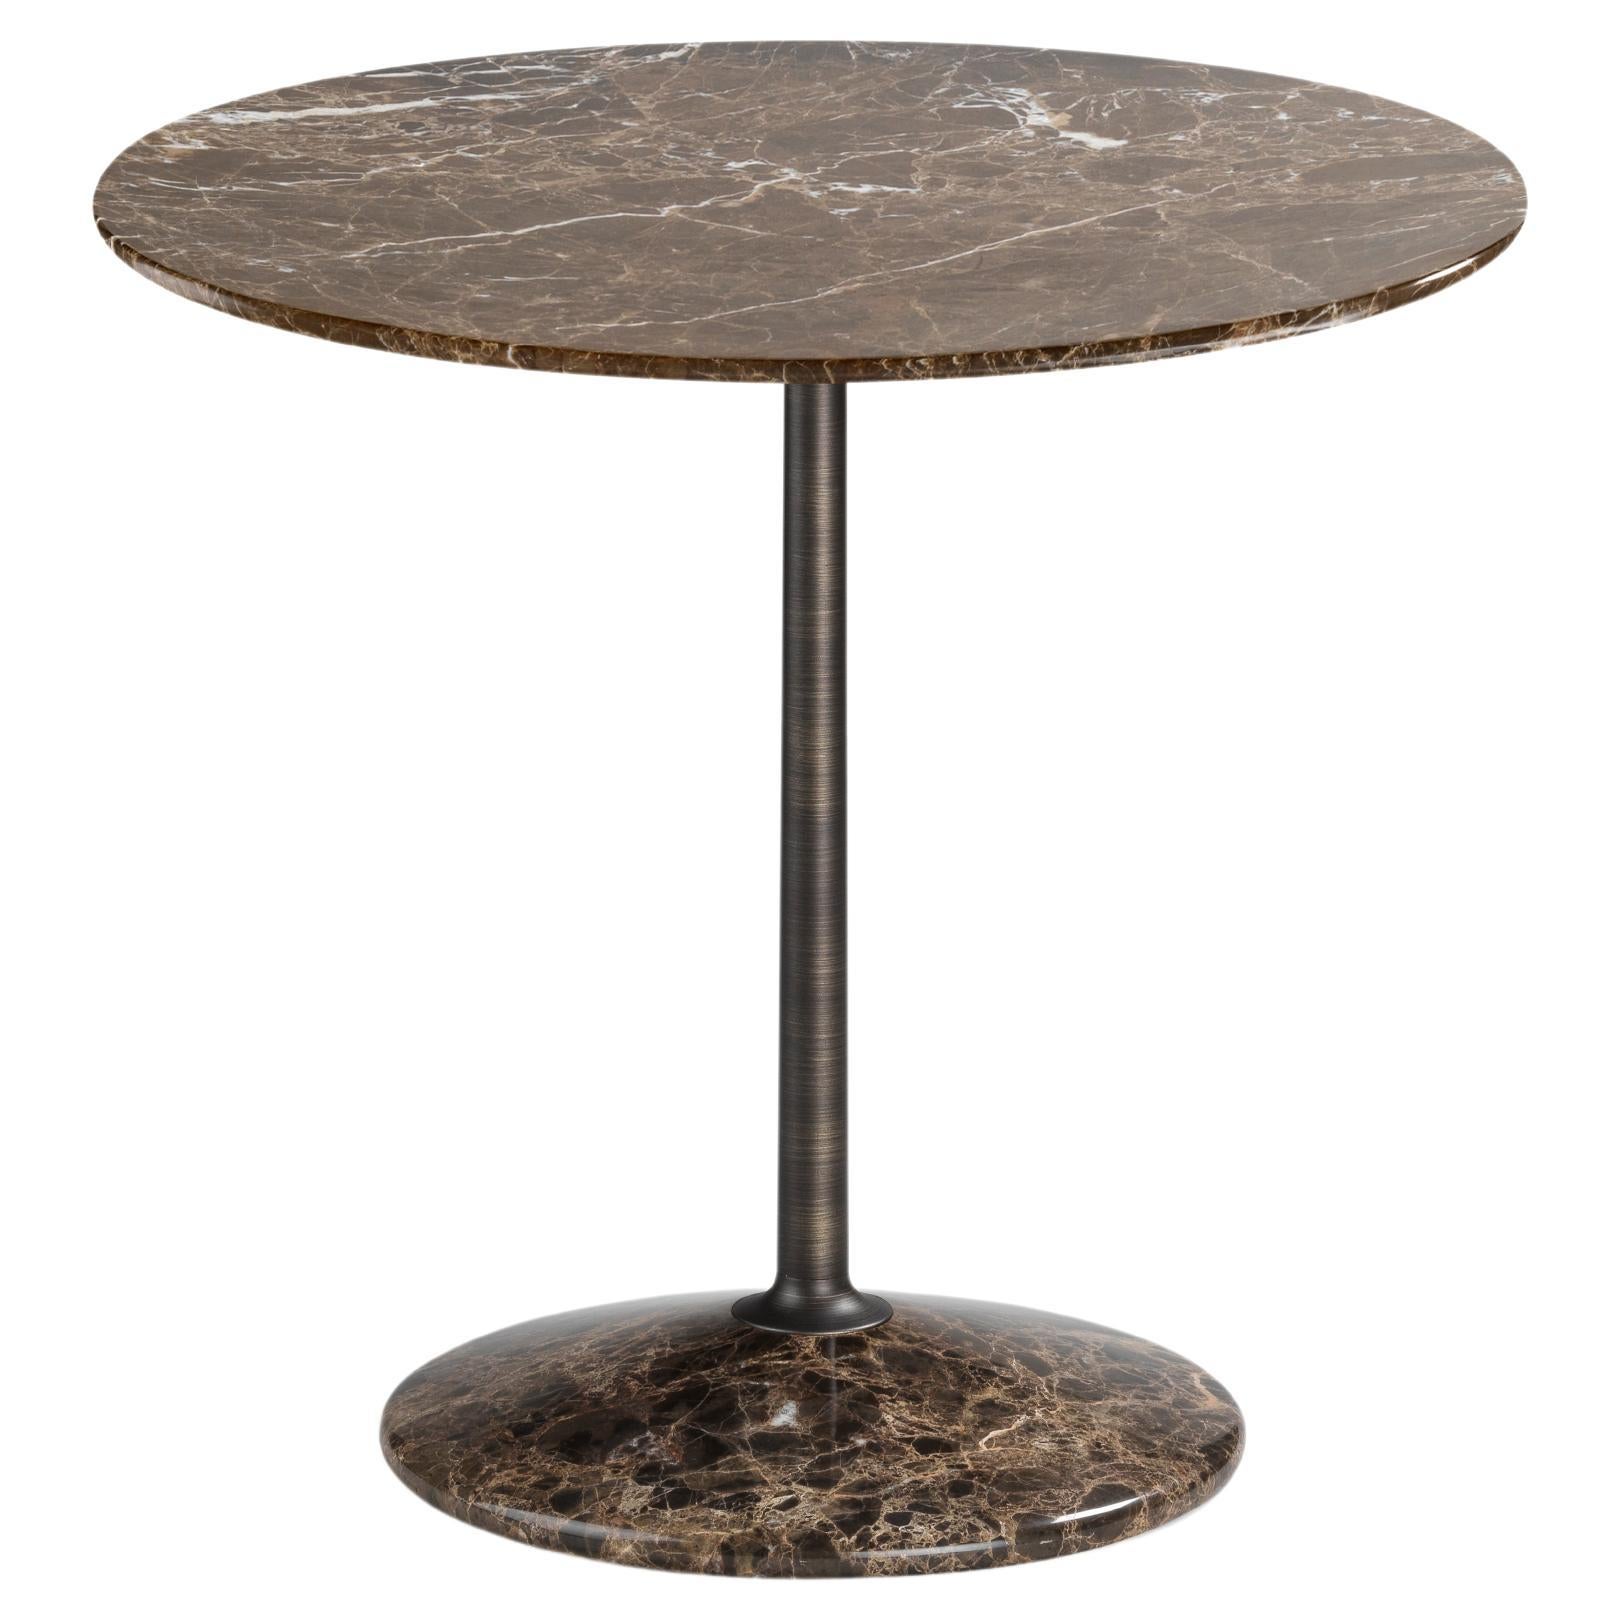 Arnold Short Table, Emperador Dark Top, Burnished Brass Structure, Made in Italy